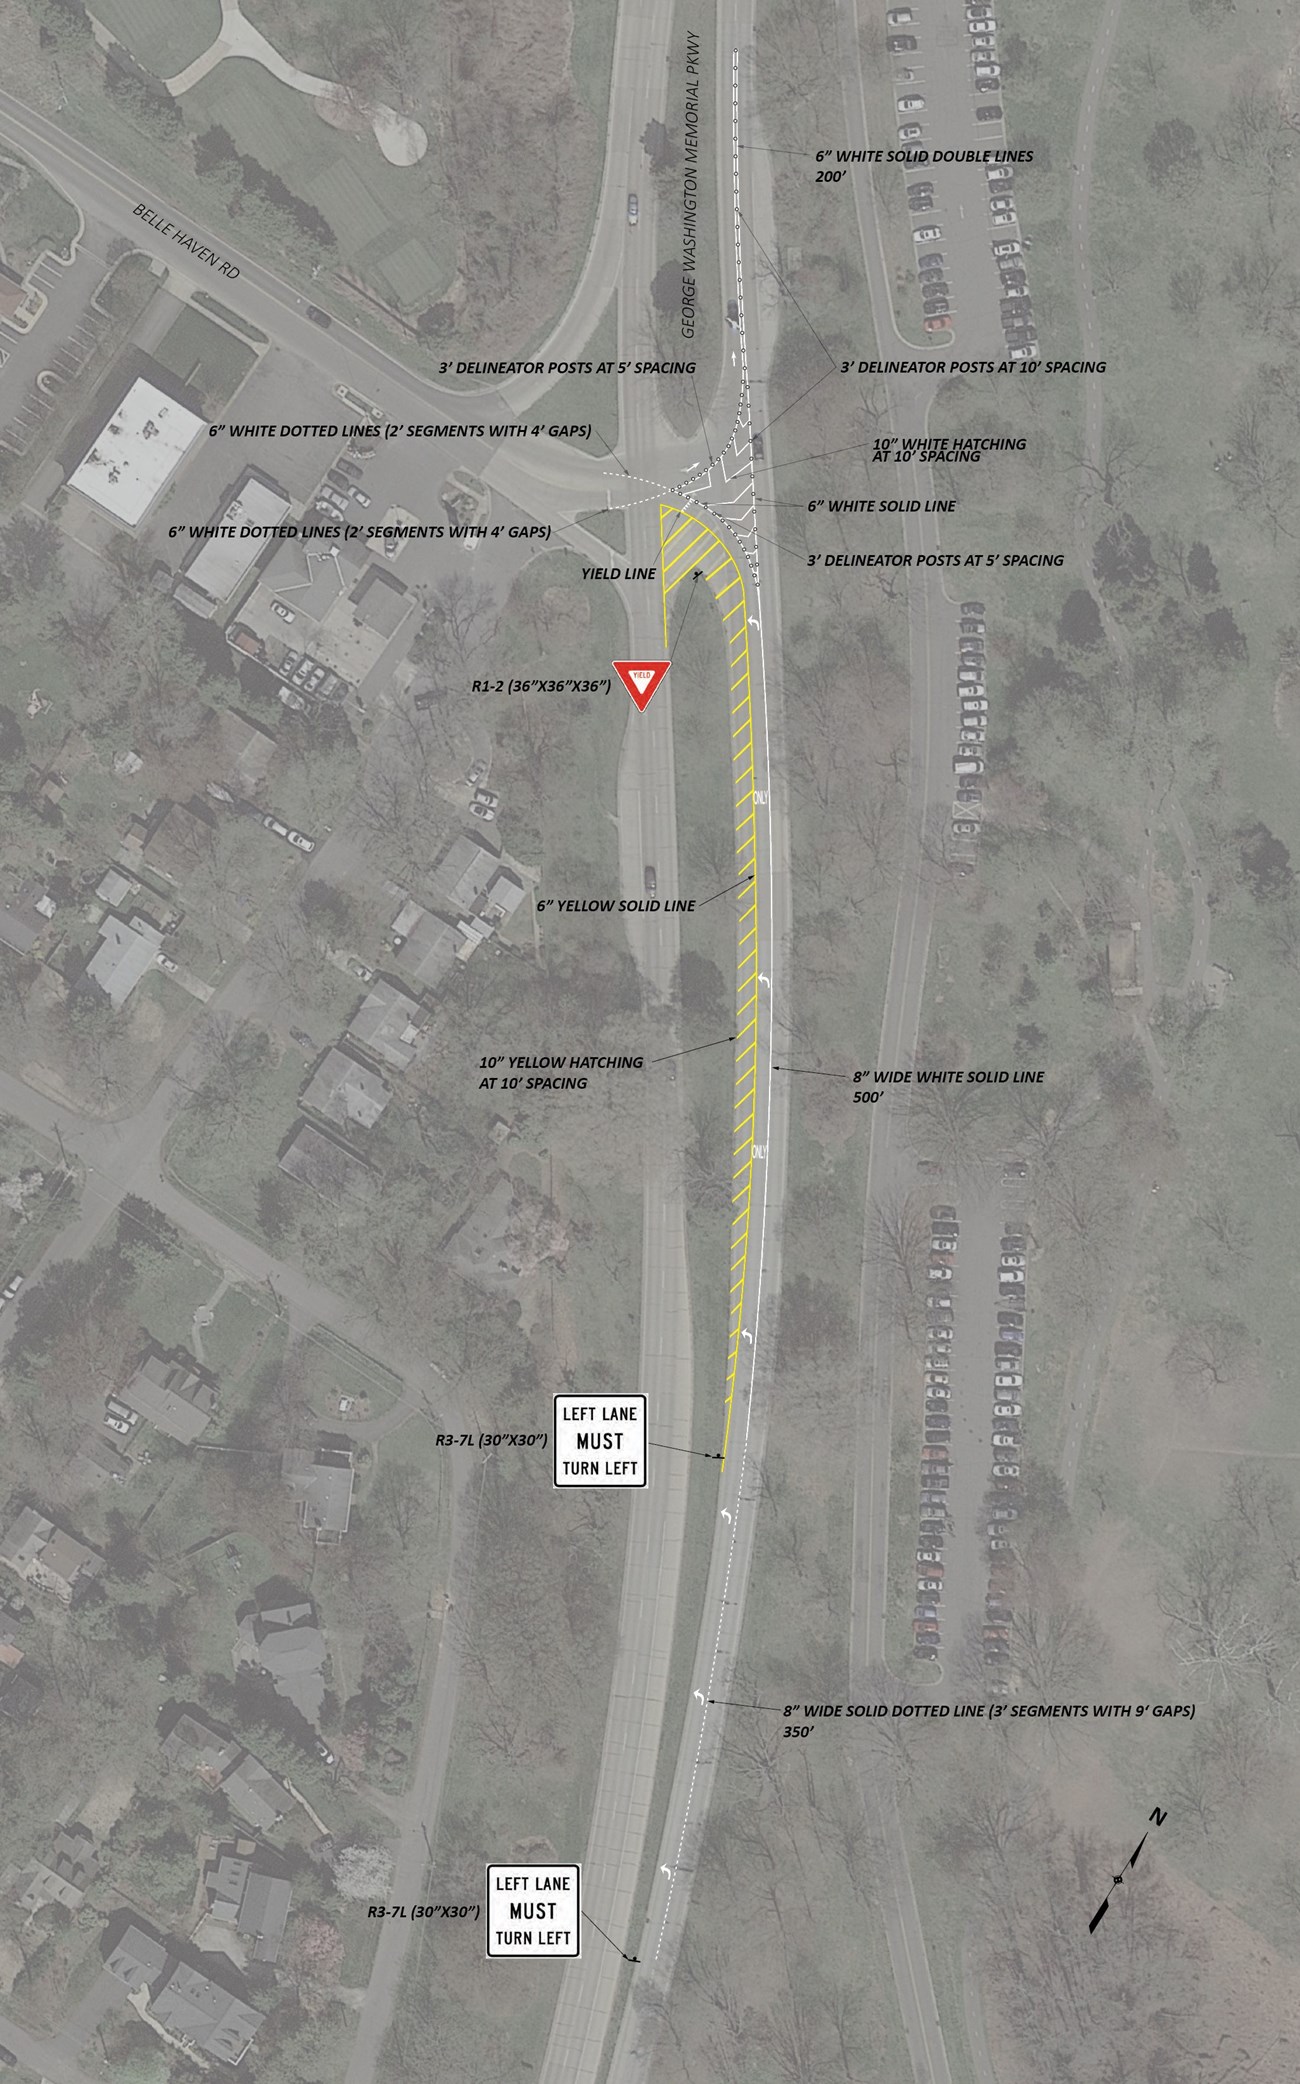 Diagram on new intersection at Belle Haven